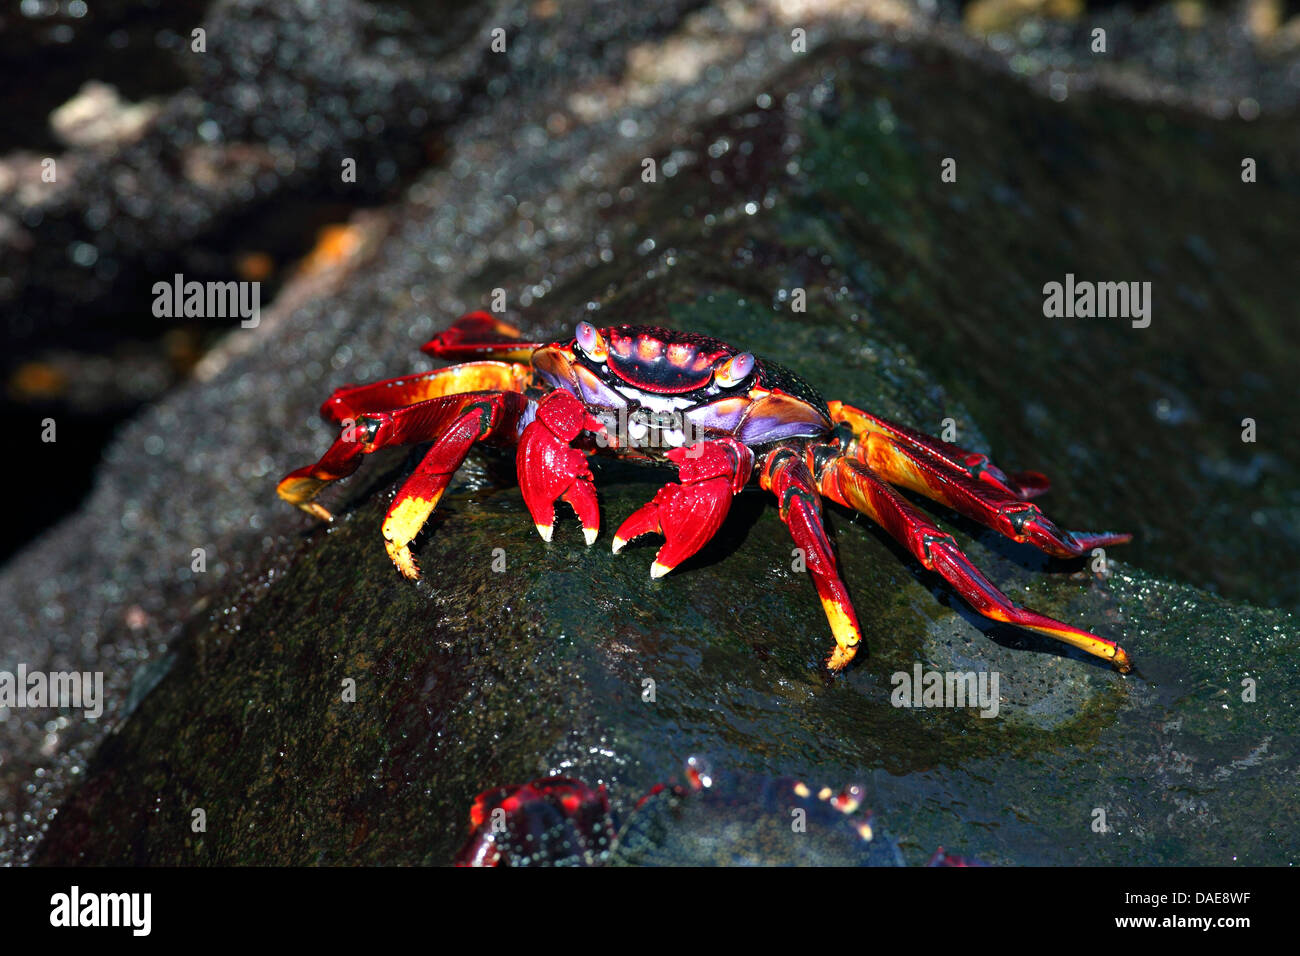 Sally lightfoot crab, Mottled shore crab (Grapsus grapsus), walking on a rock in the surf, Canary Islands, La Palma Stock Photo